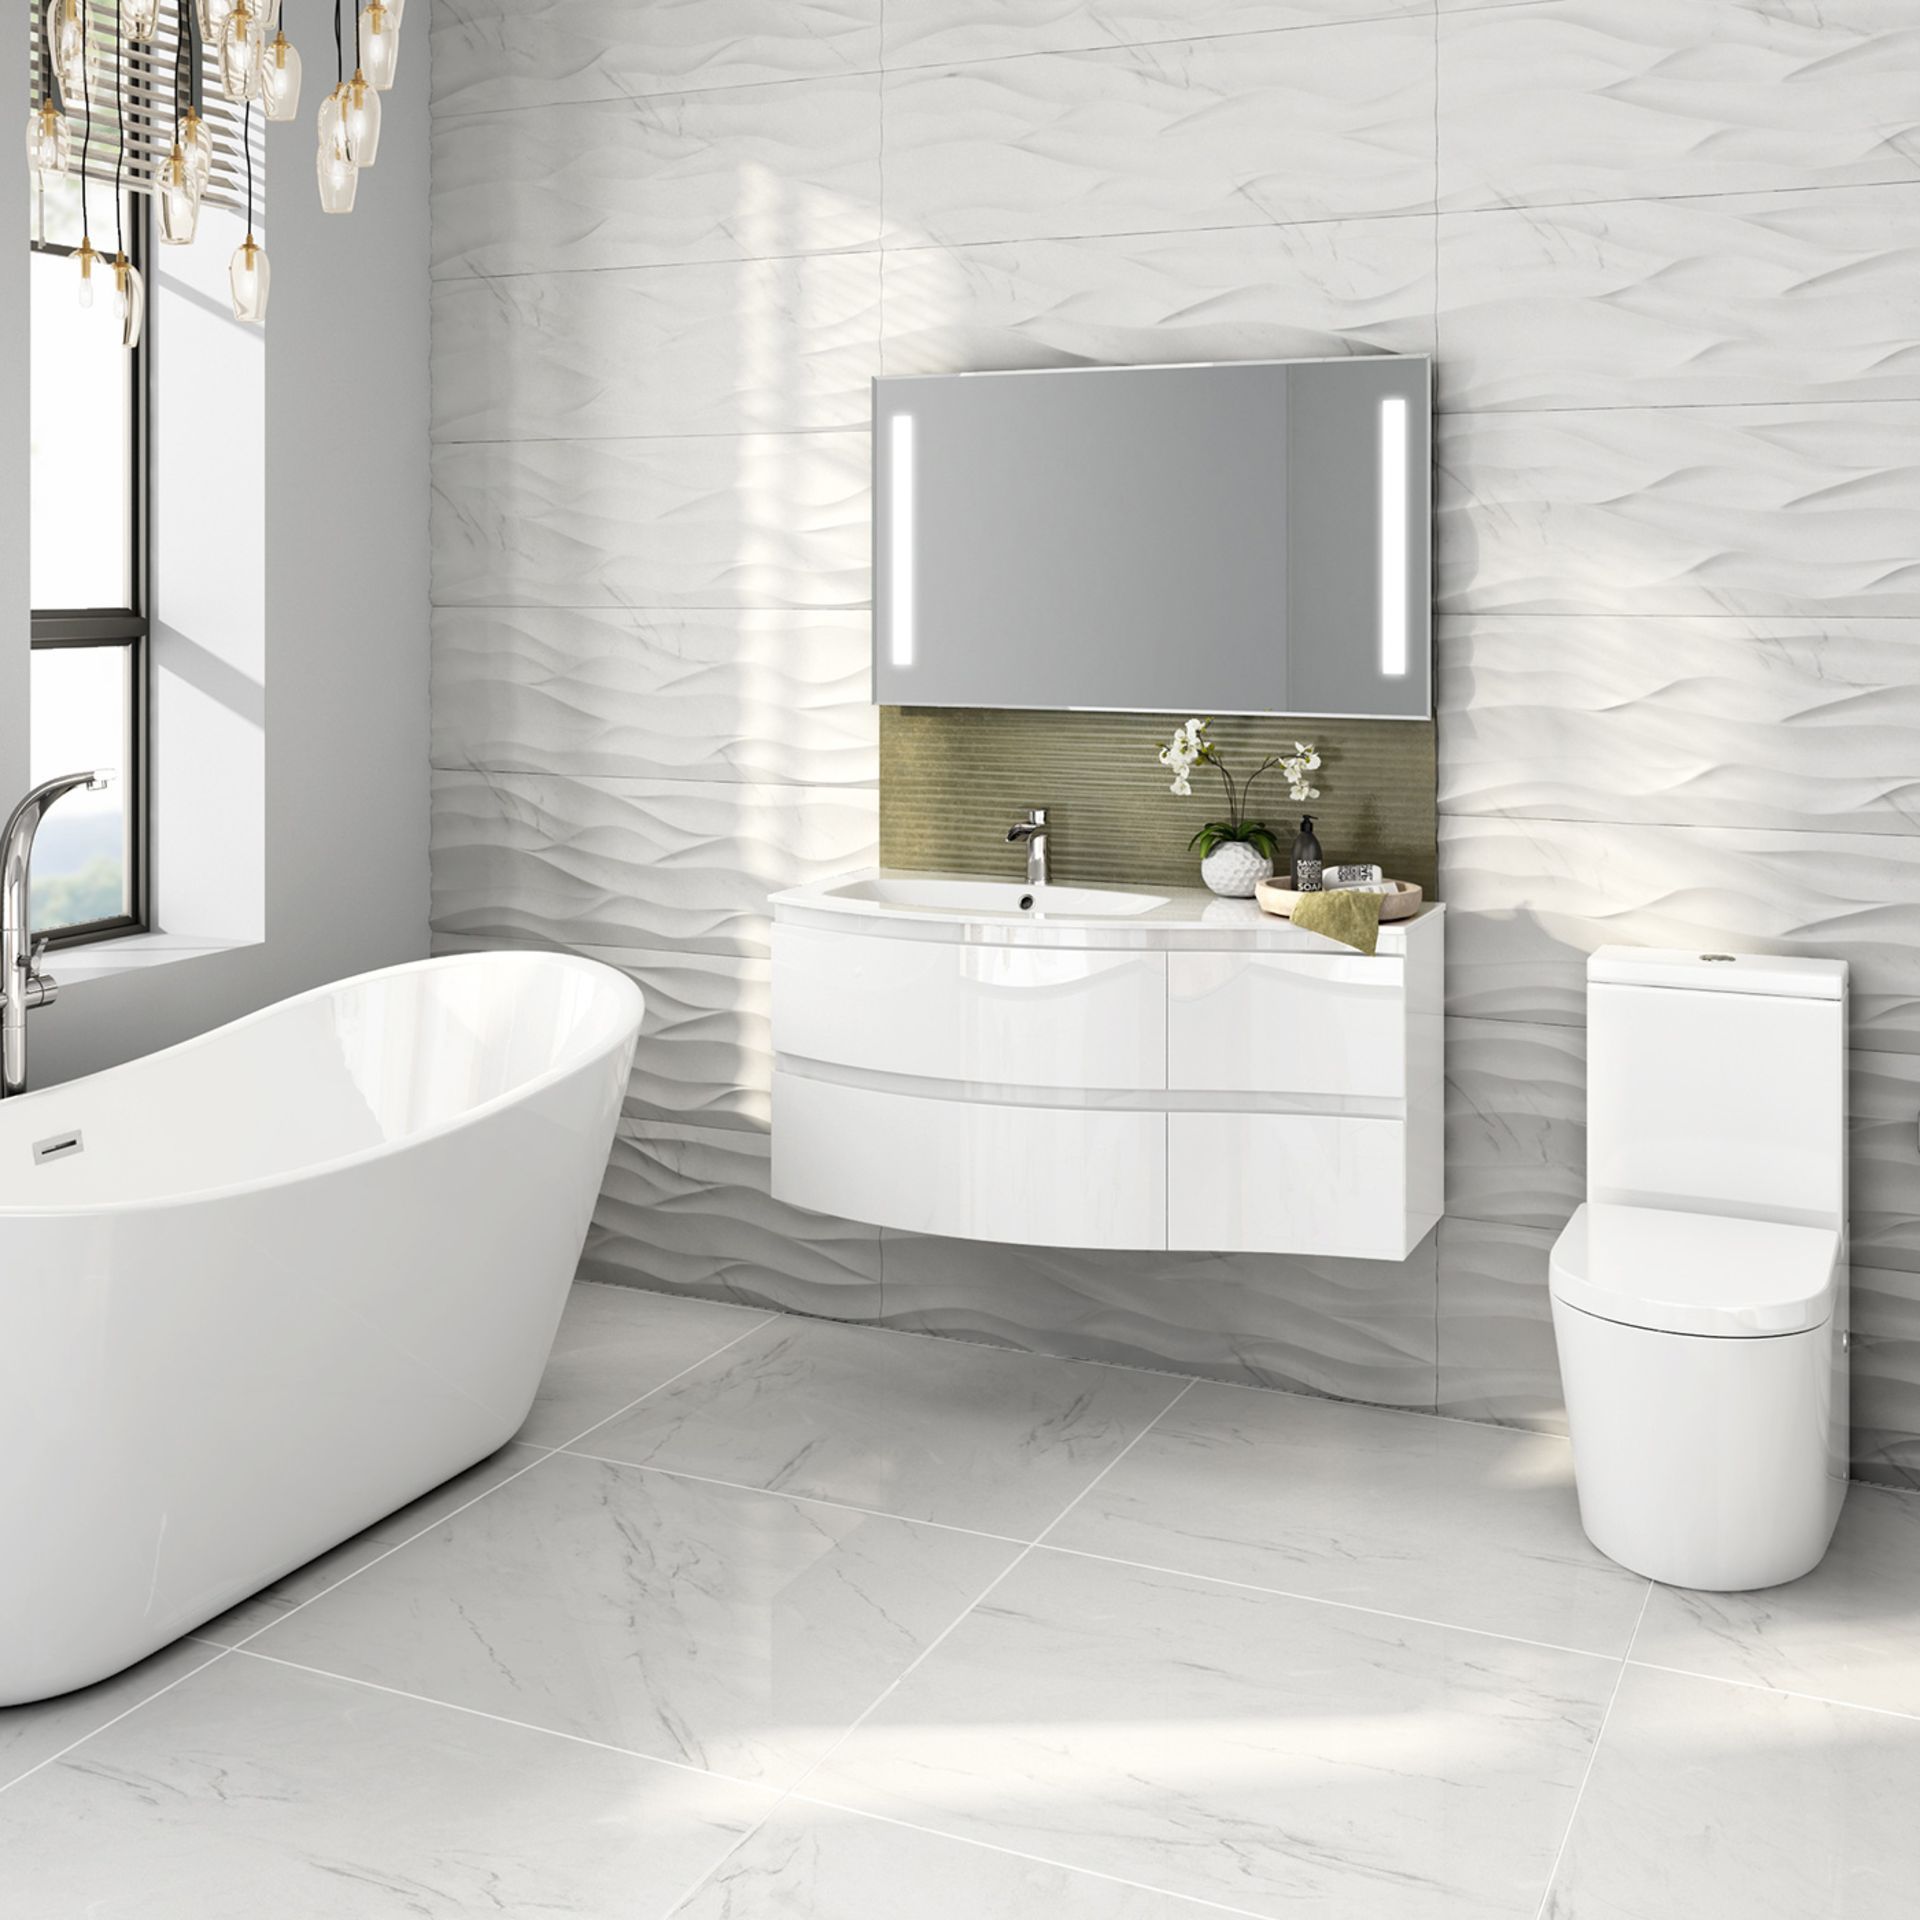 1040mm Amelie High Gloss White Curved Vanity Unit - Left Hand - Wall Hung. RRP £1,499.COMES ... - Image 2 of 4